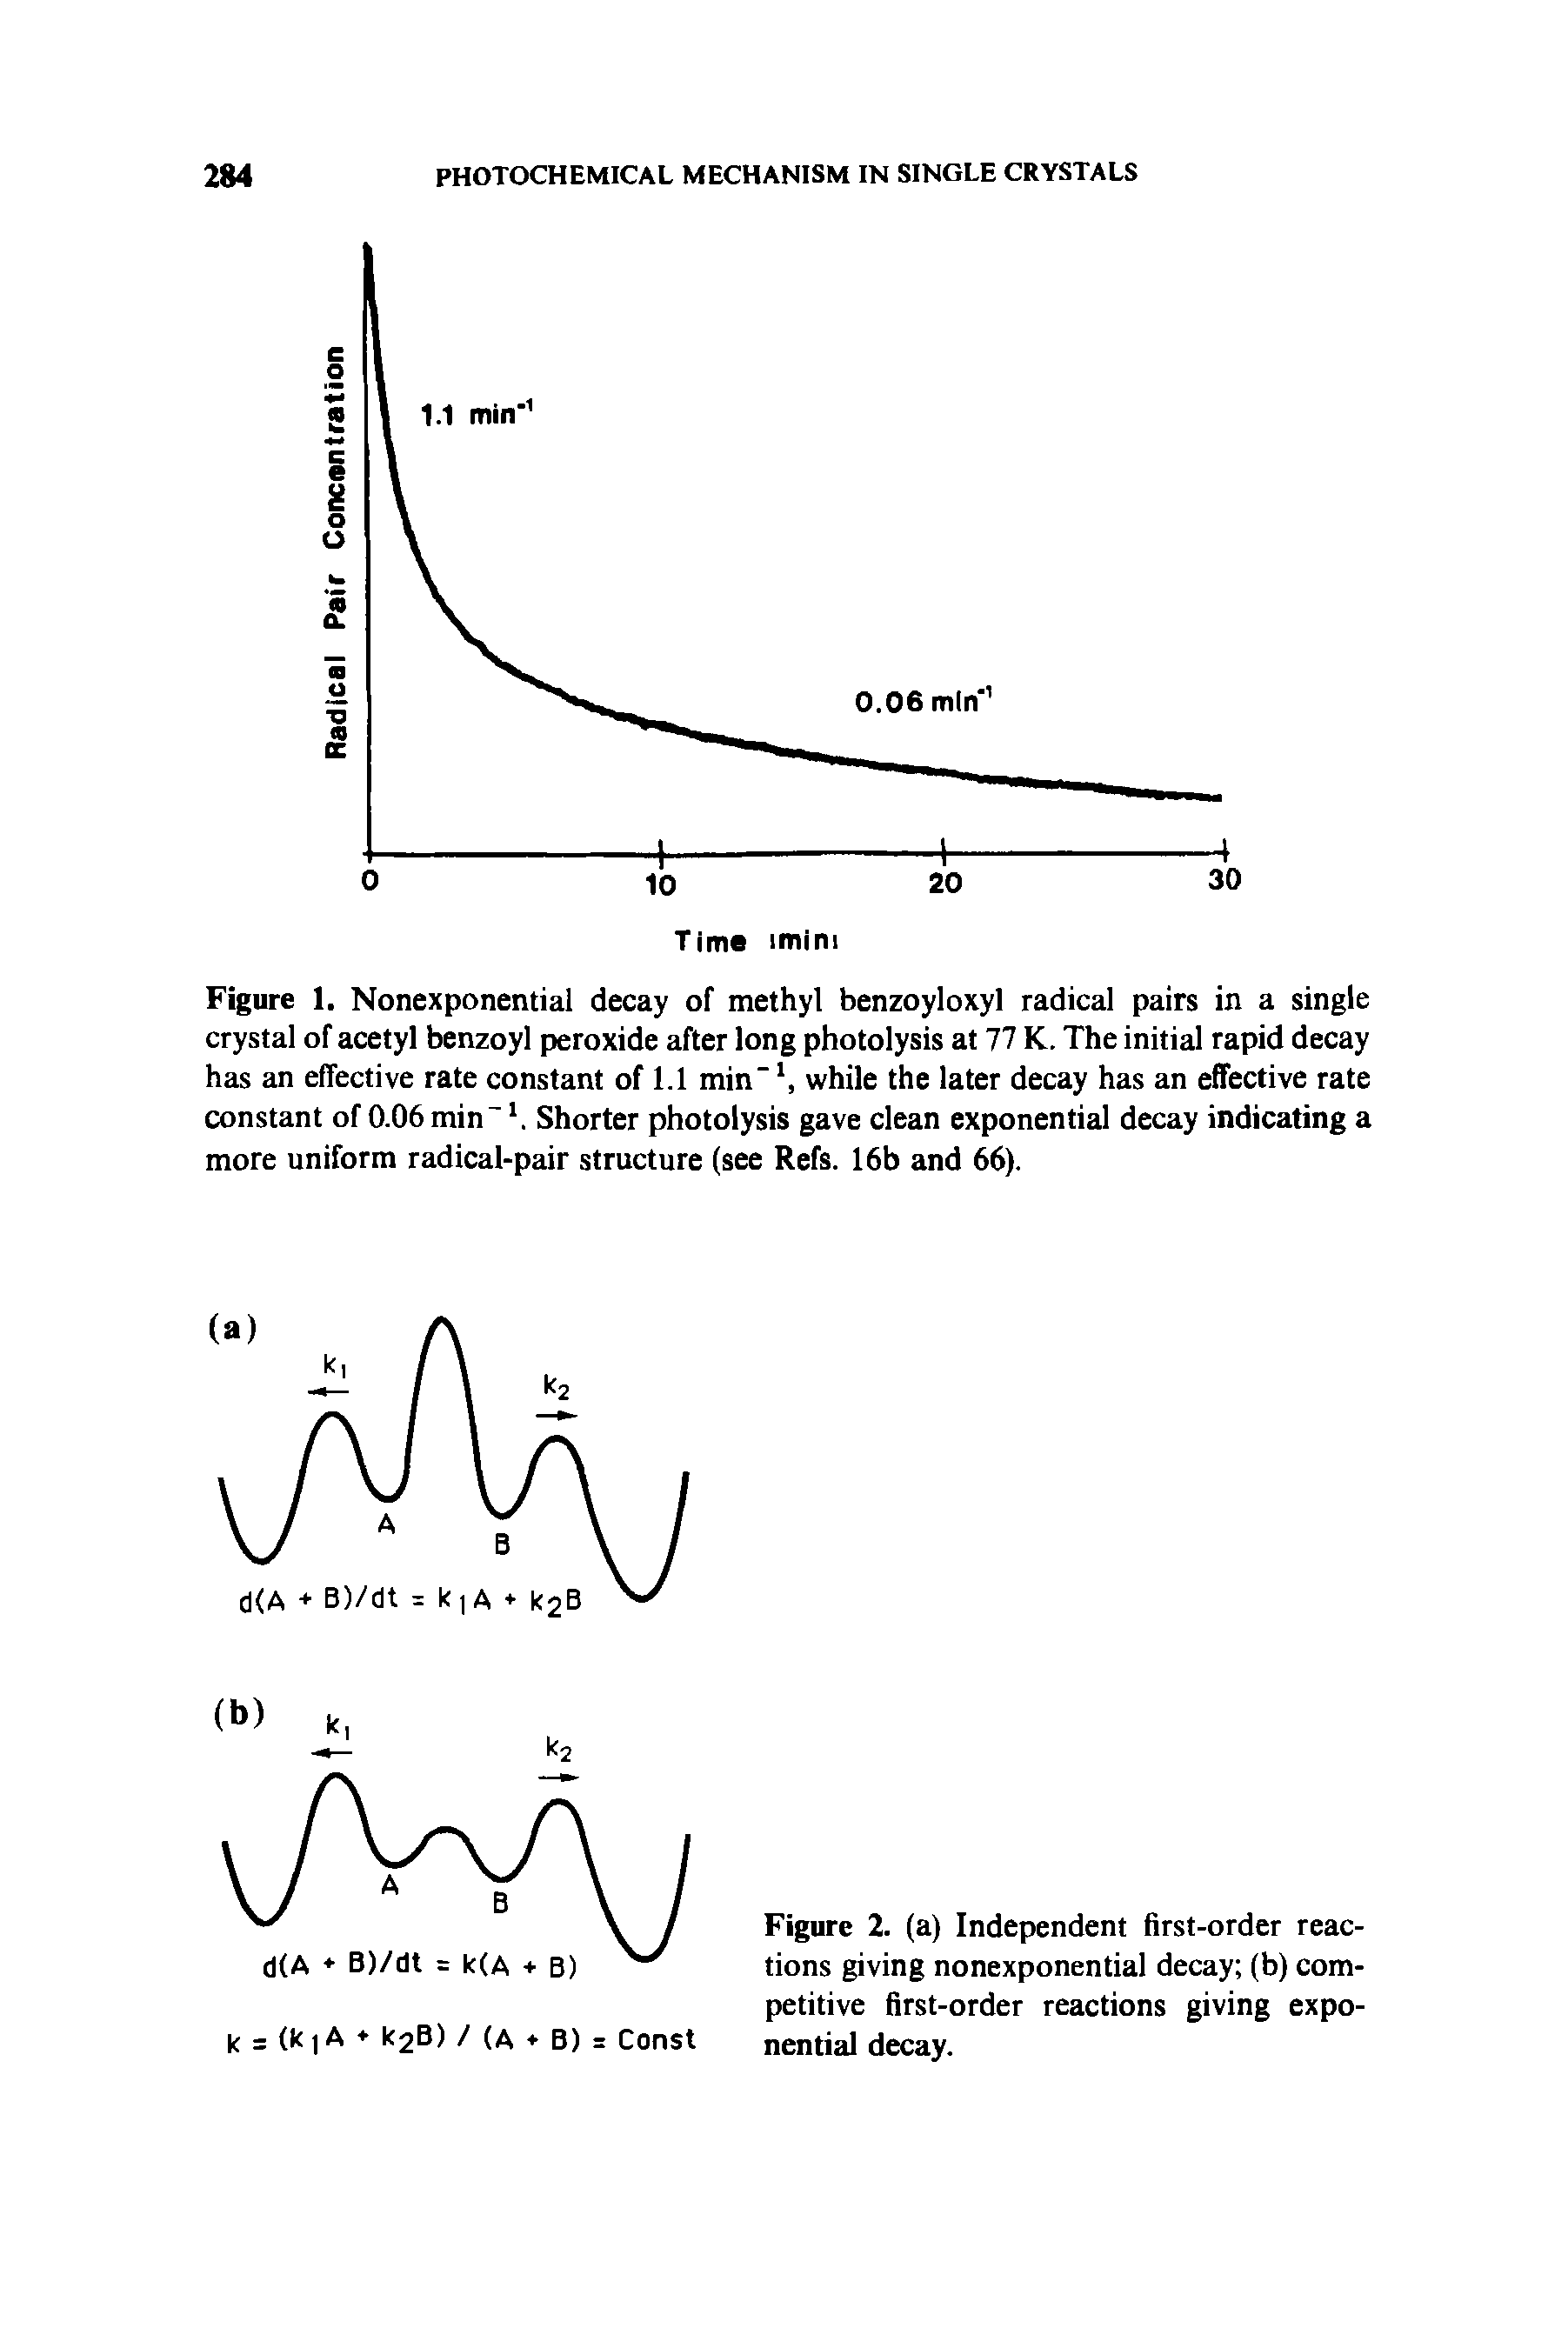 Figure 1. Nonexponential decay of methyl benzoyloxyl radical pairs in a single crystal of acetyl benzoyl peroxide after long photolysis at 77 K. The initial rapid decay has an effective rate constant of 1.1 min" while the later decay has an effective rate constant of 0.06 min -. Shorter photolysis gave clean exponential decay indicating a more uniform radical-pair structure (see Refs. 16b and 66).